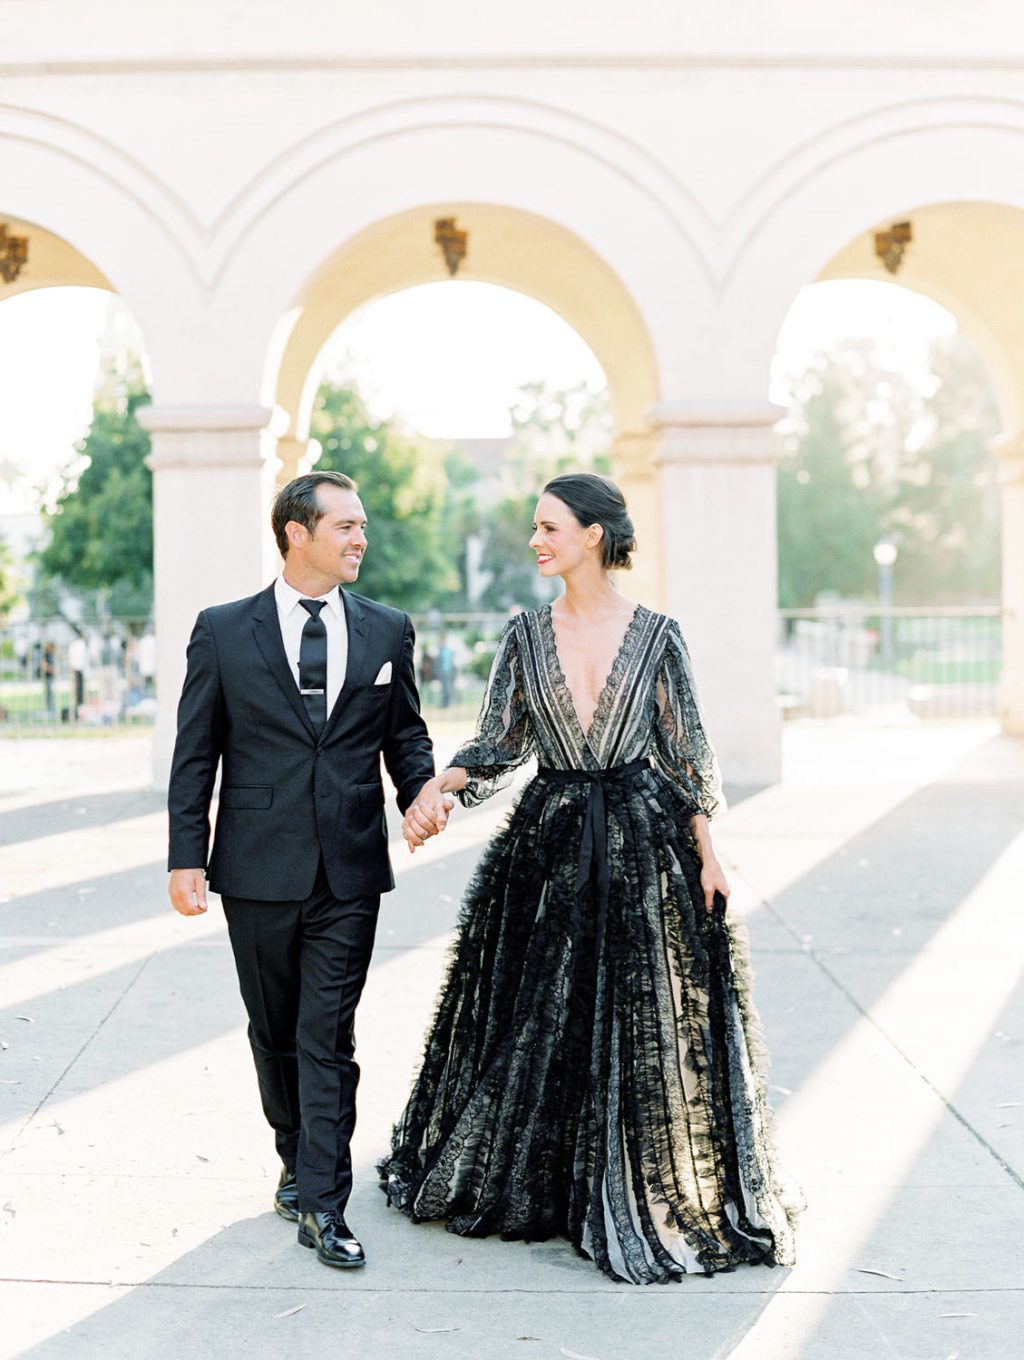 A Guide to Second Marriage Wedding Dresses + Our Favorites